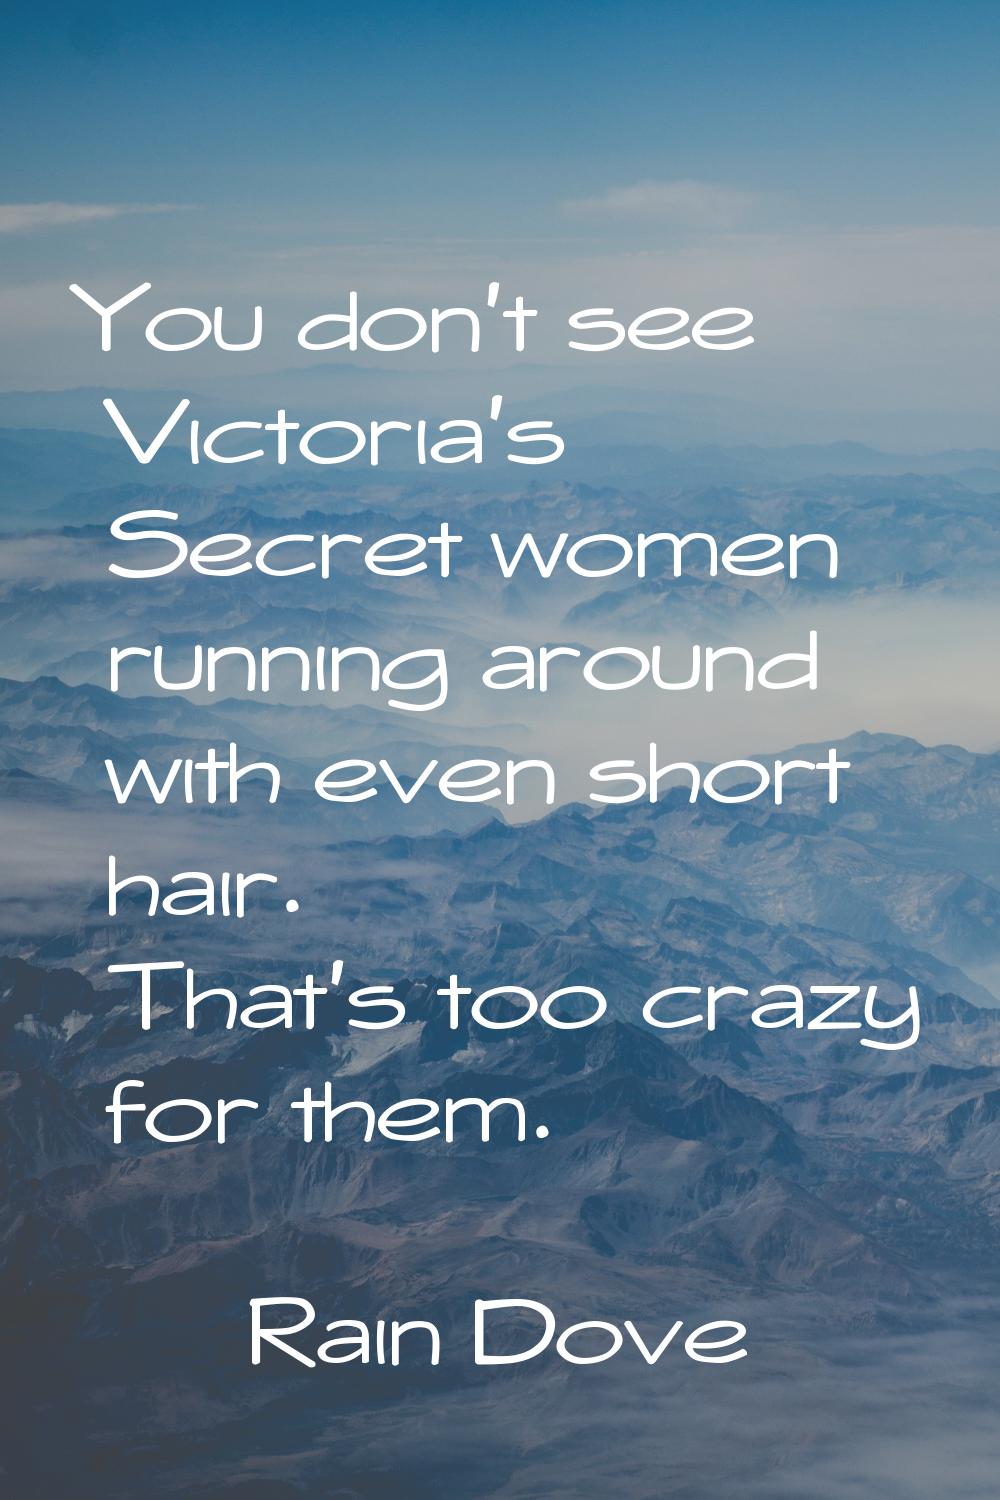 You don't see Victoria's Secret women running around with even short hair. That's too crazy for the